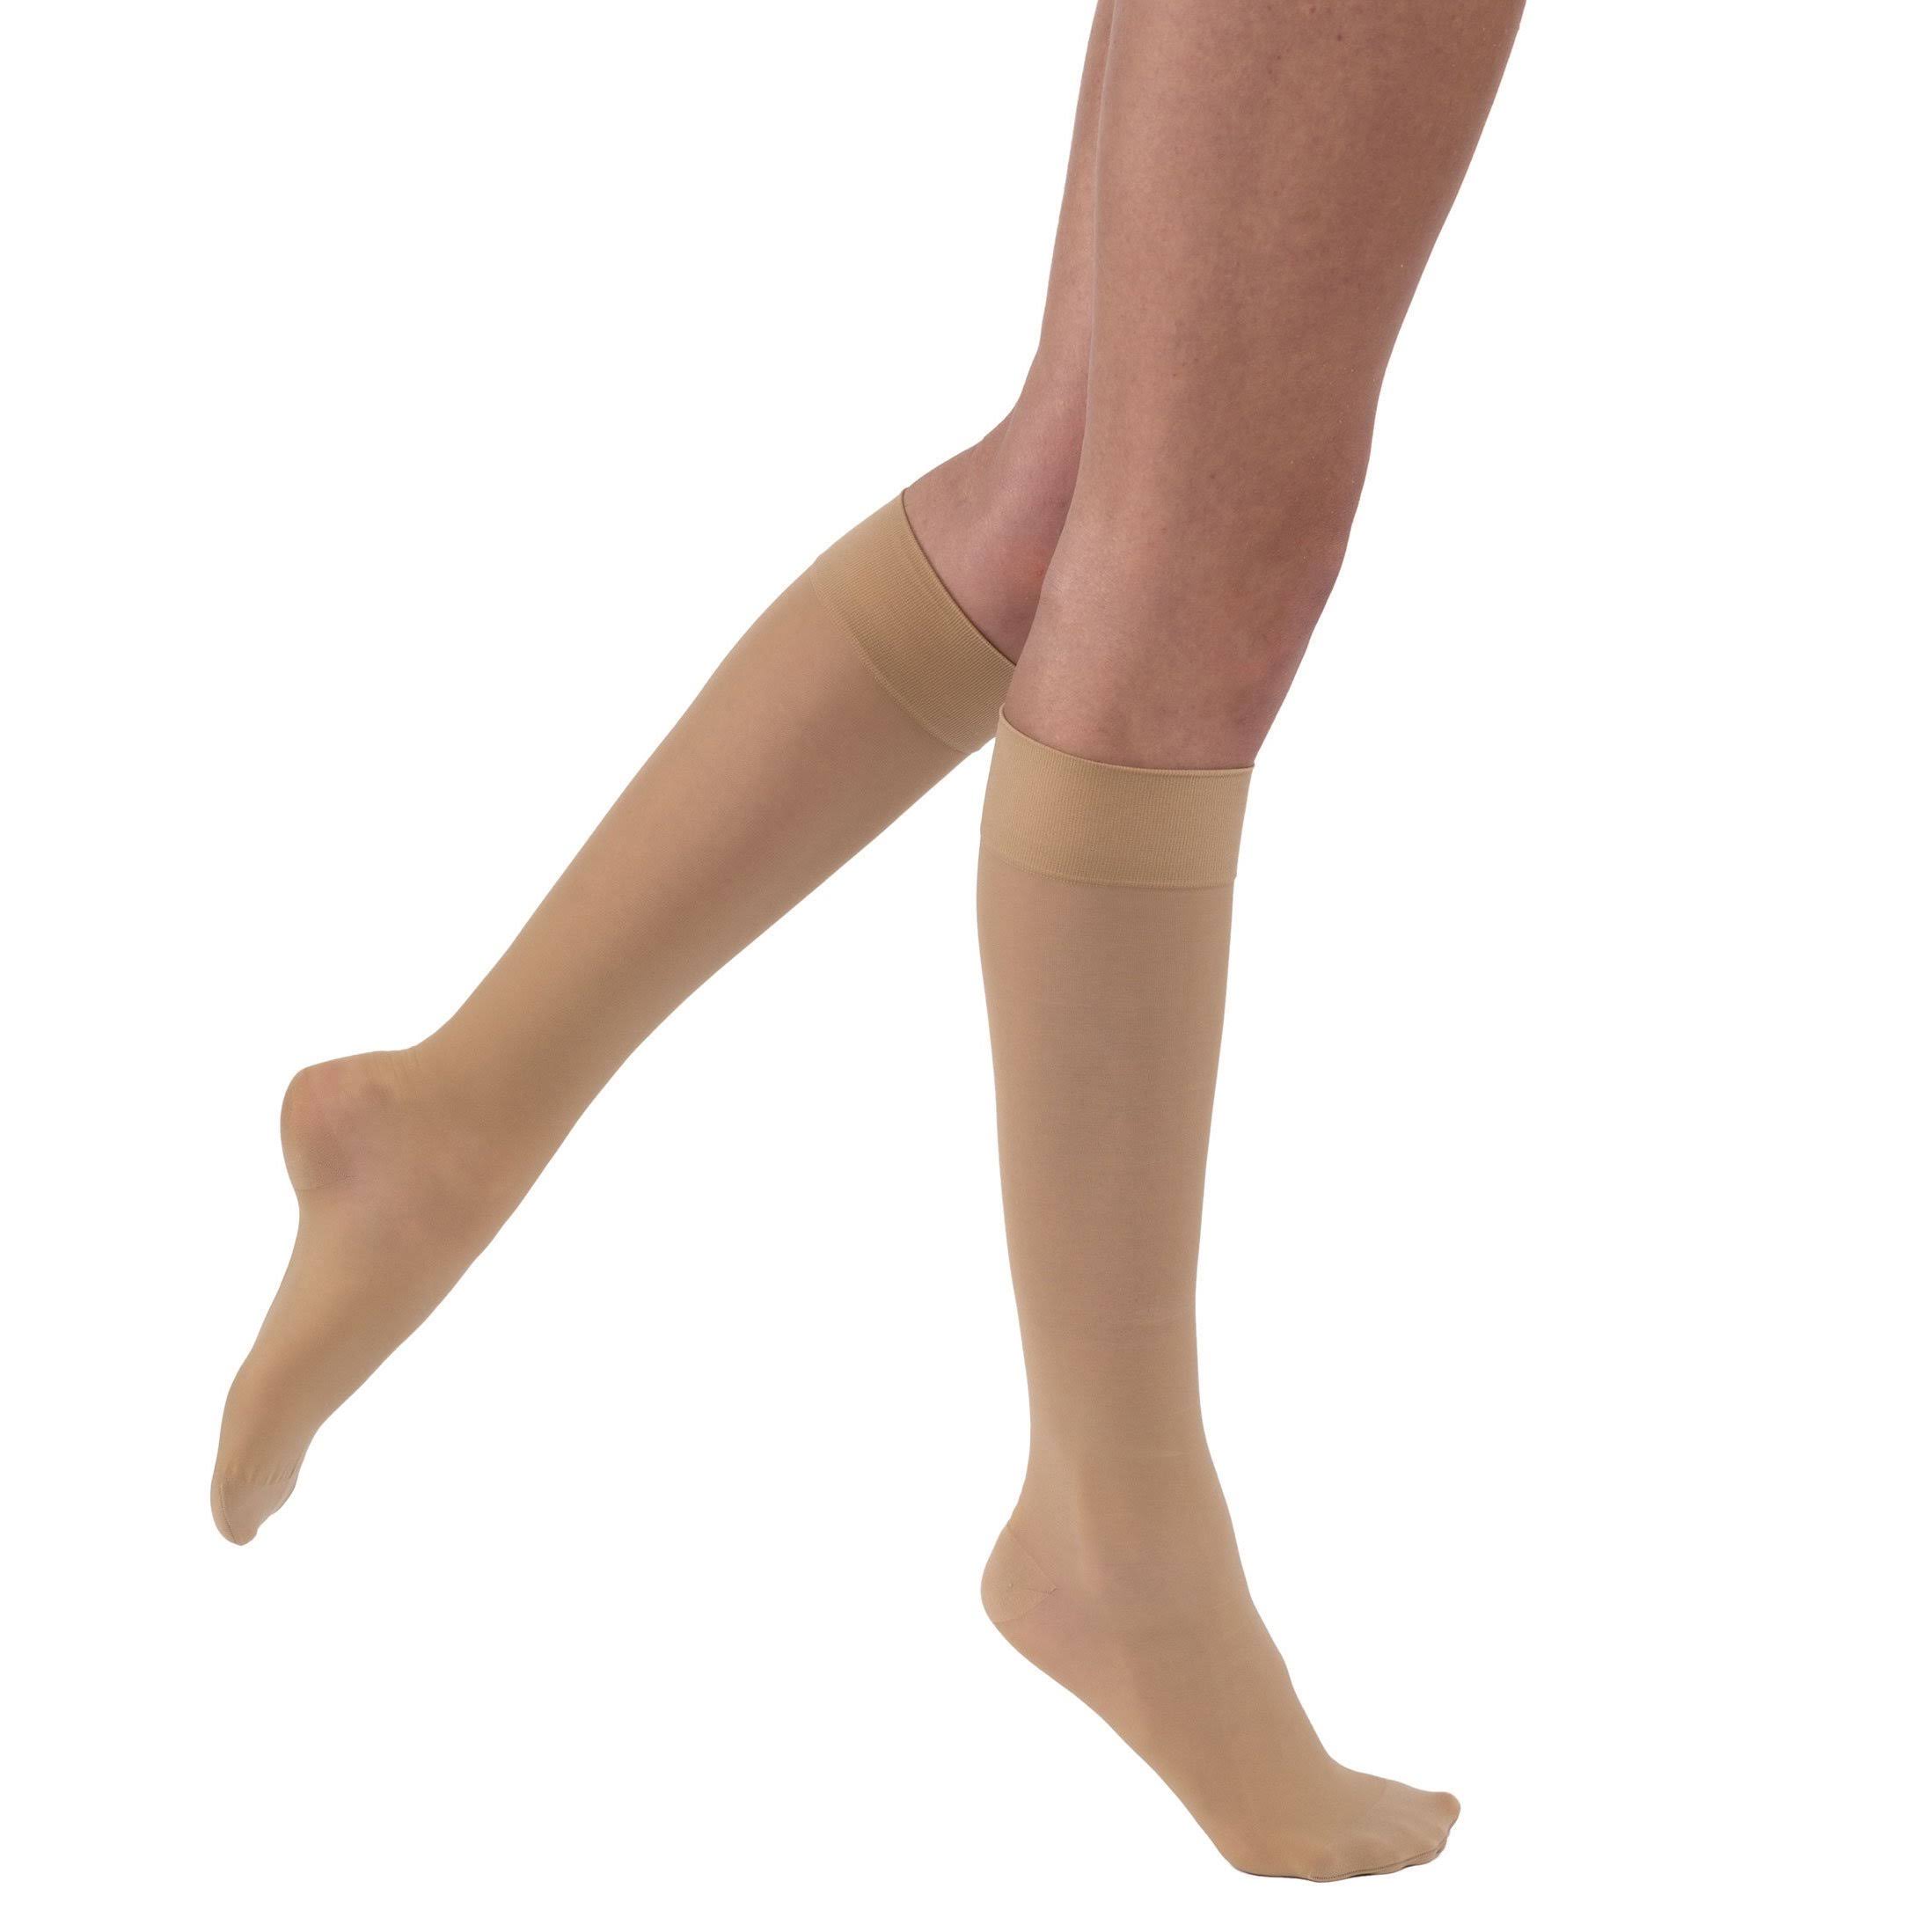 Jobst Moderate Support Ultrasheer Knee High Stockings - Silky Beige - X-Large